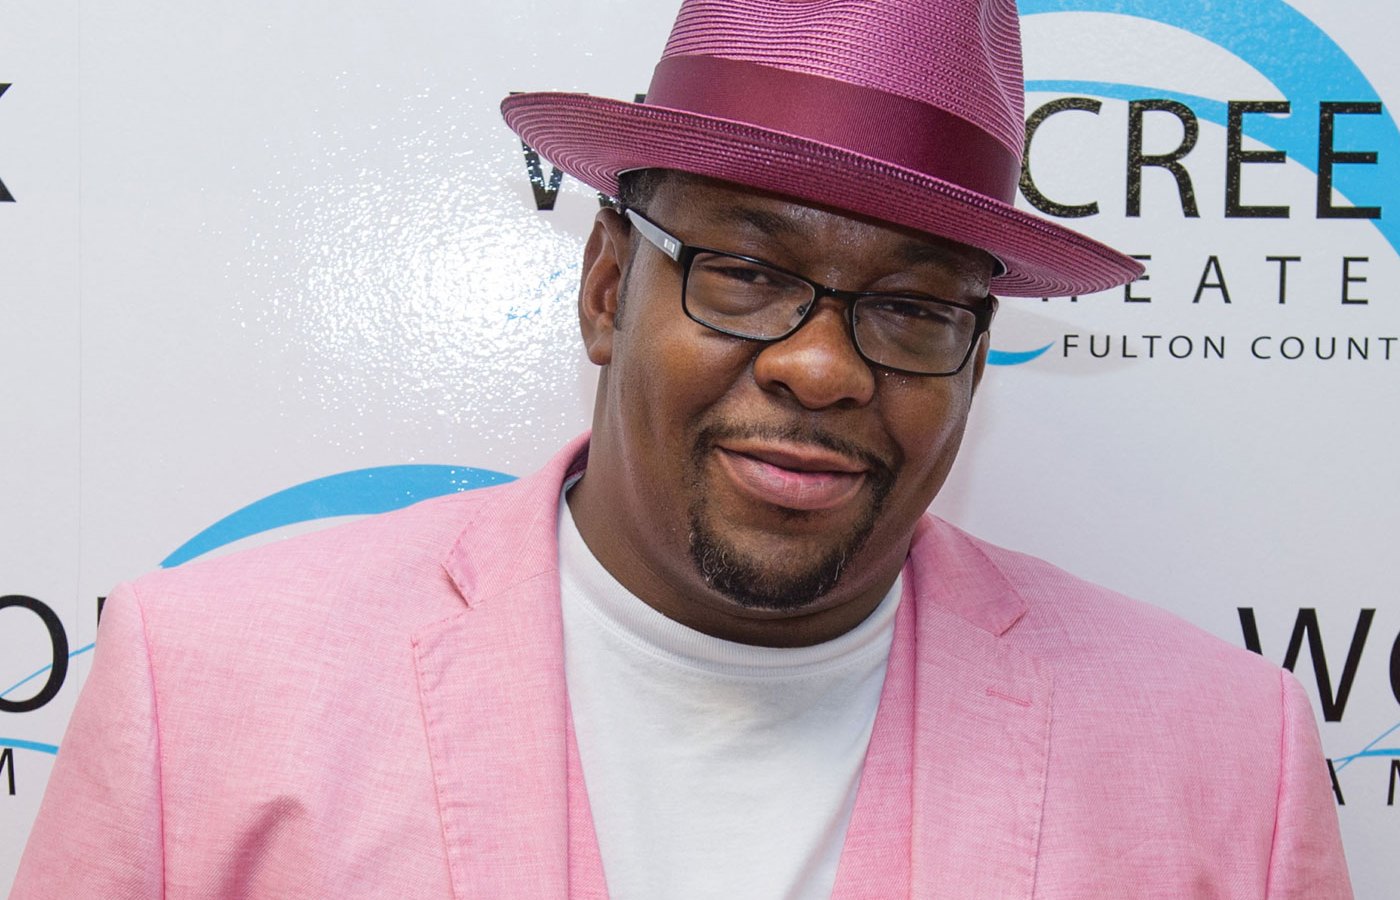 Bobby Brown is penning a raw and unvarnished memoir